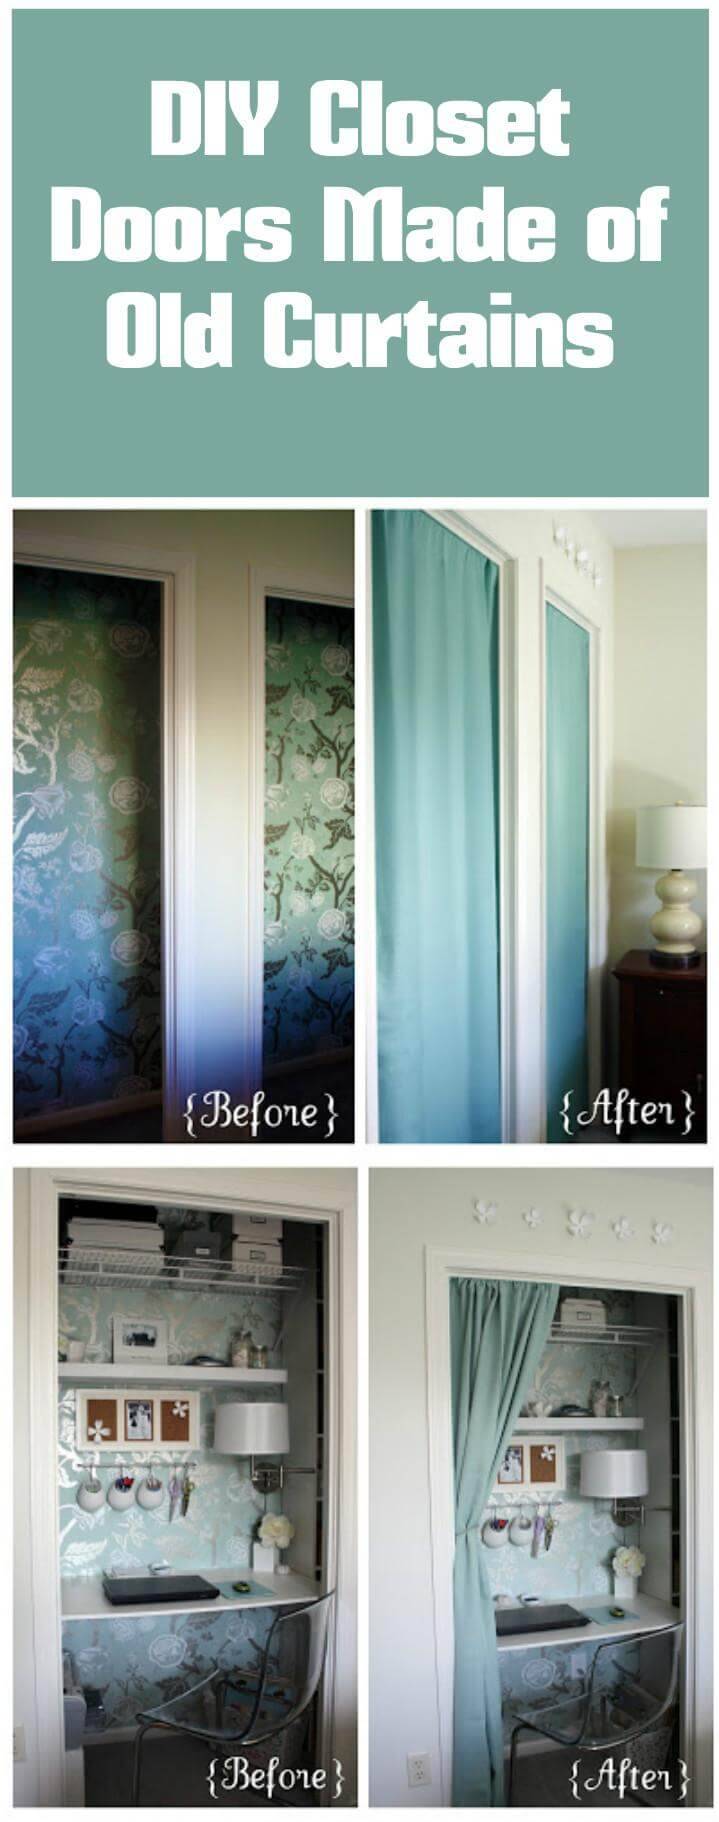 instant closet doors made out of old curtains